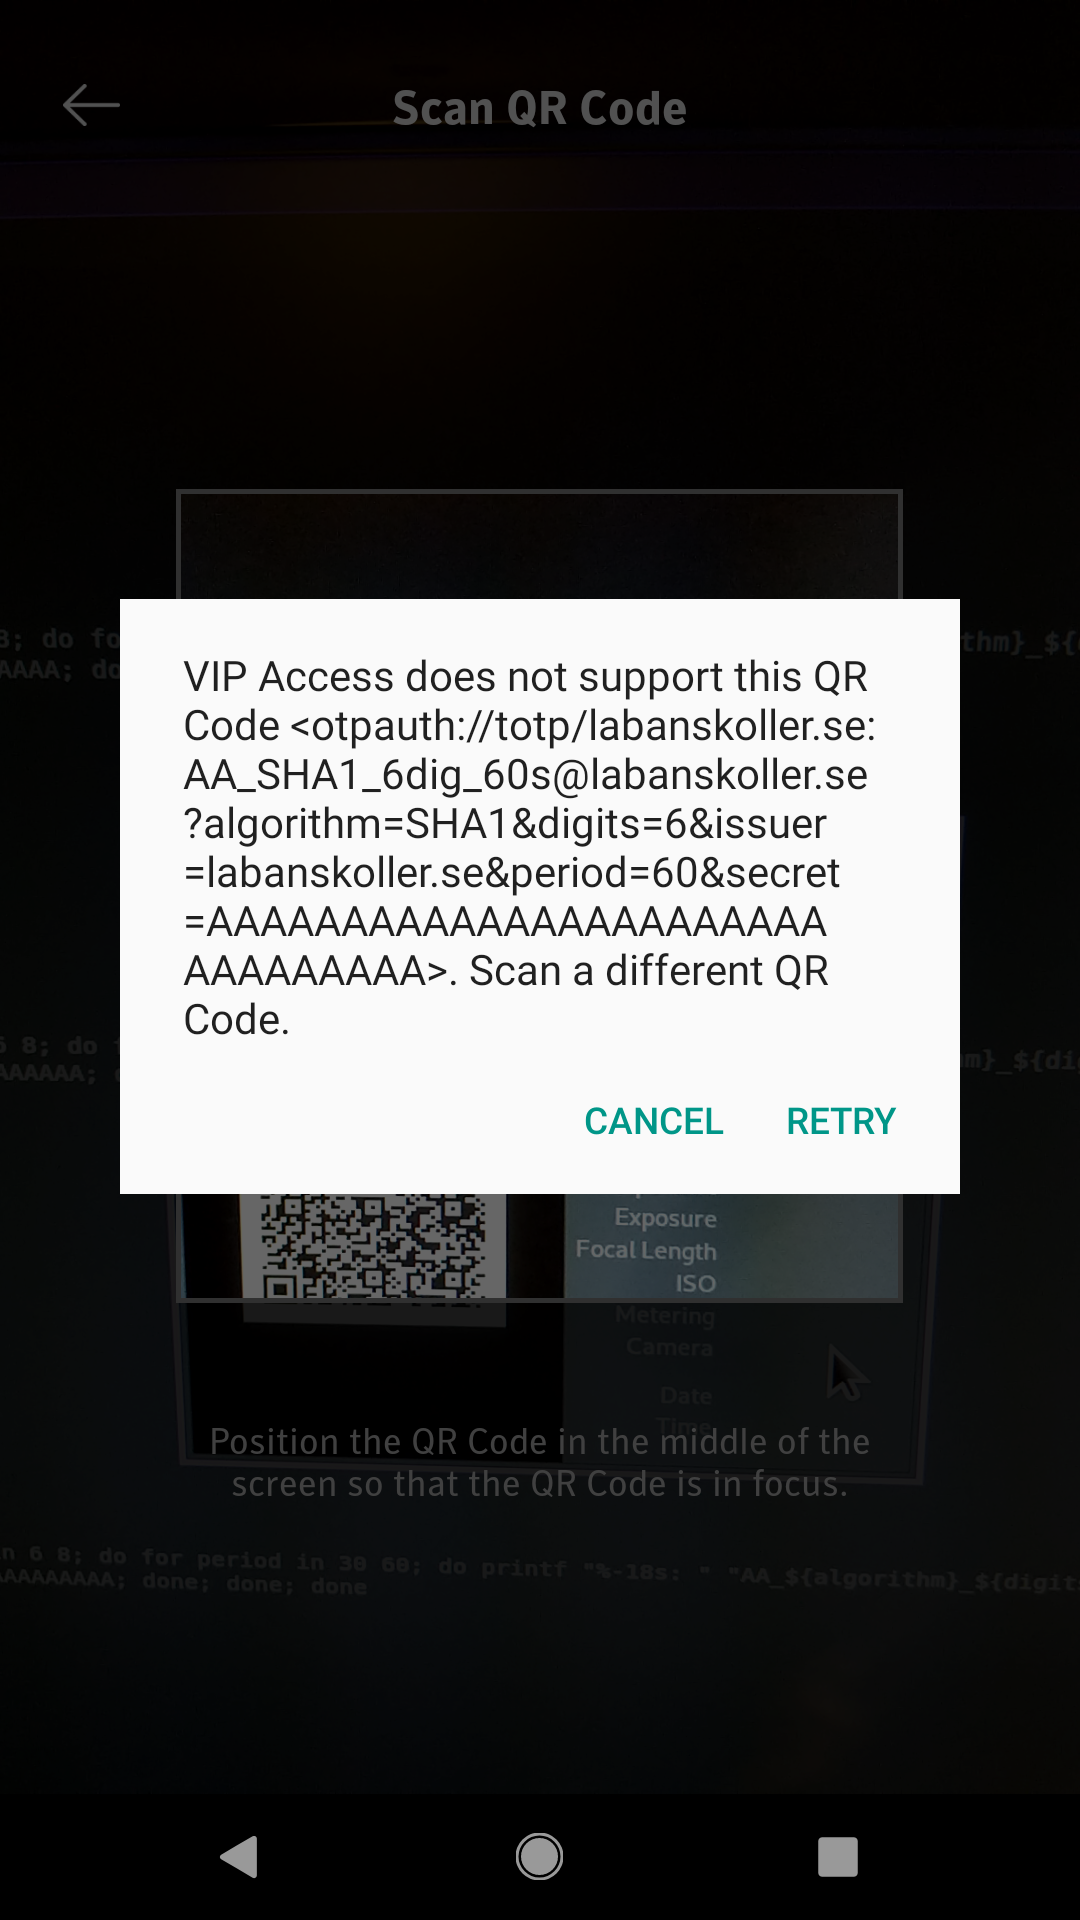 VIP Access does not support this QR Code <otpauth://totp/labanskoller.se:AA_SHA1_6dig_60s@labanskoller.se?algorithm=SHA1&digits=6&issuer=labanskoller.se&period=60&secret=AAAAAAAAAAAAAAAAAAAAAAAAAAAAAAAA>. Scan a different QR Code. CANCEL RETRY